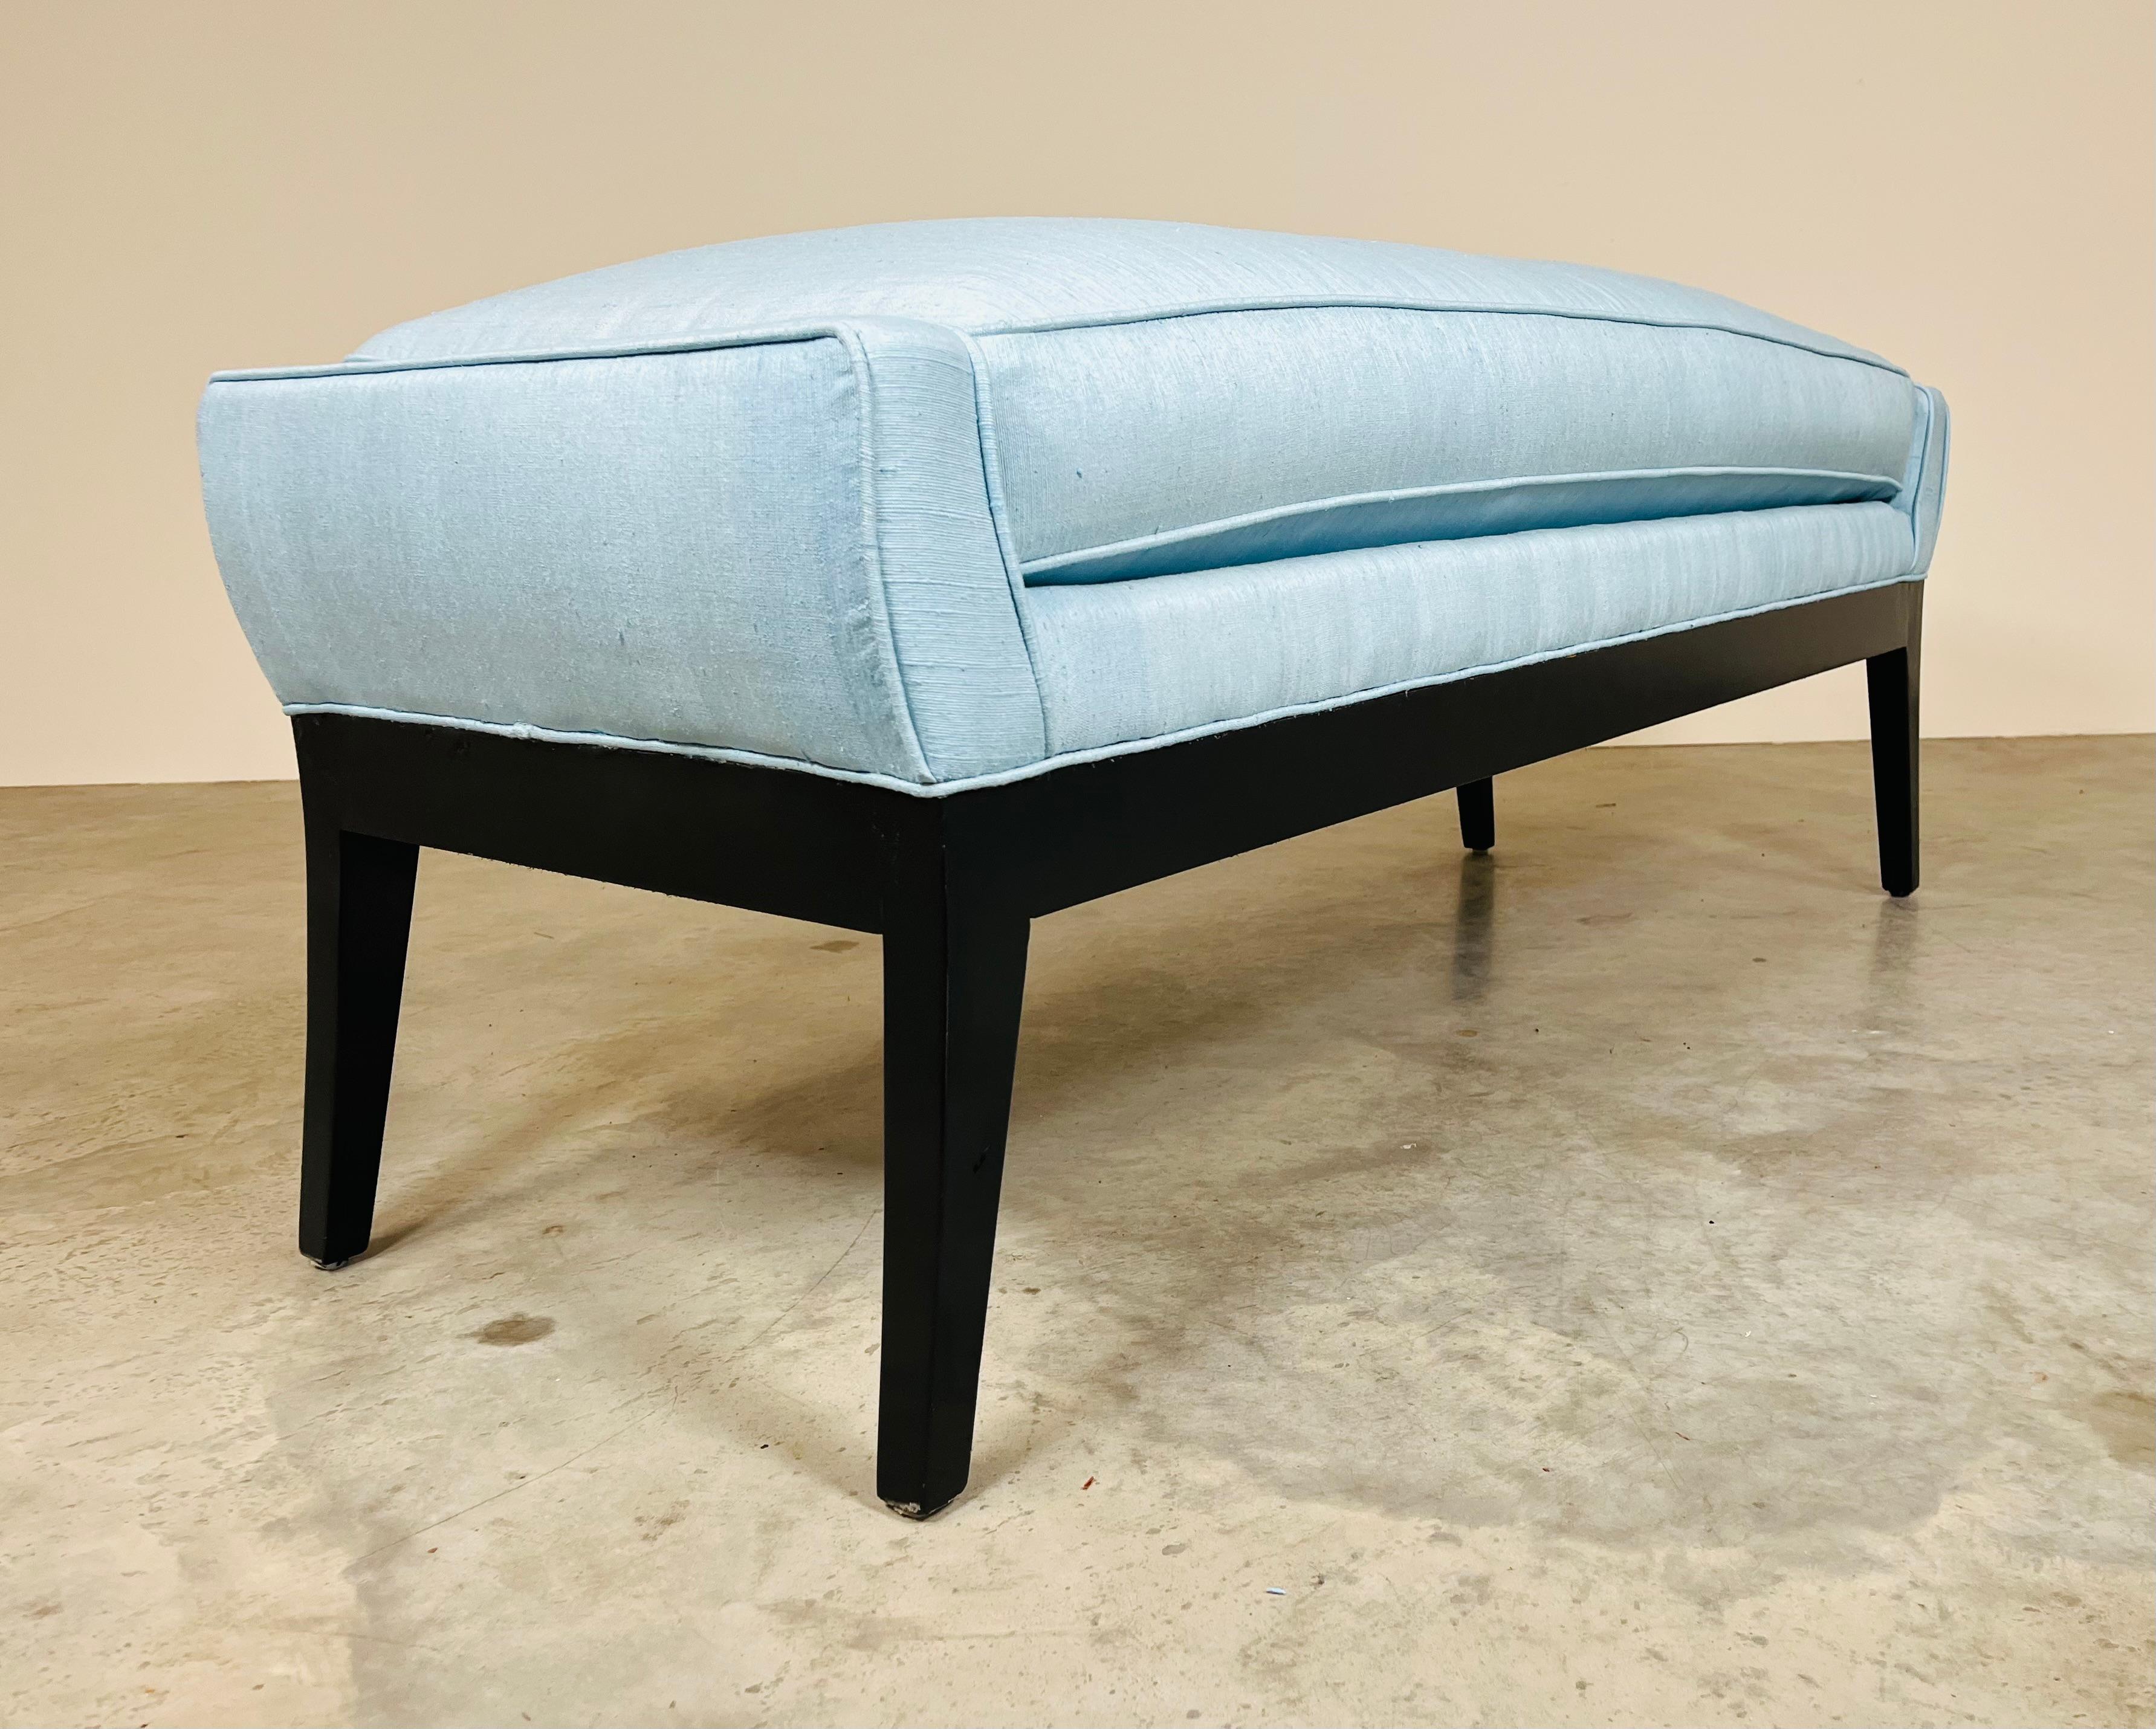 Fully restored Mid-Century Modern window bench attributed to Edward Wormley for Dunbar. Splay leg design constructed of newly black lacquered hardwood frame.
Stationary plush single cushion is upholstered in light blue silk accented with matching